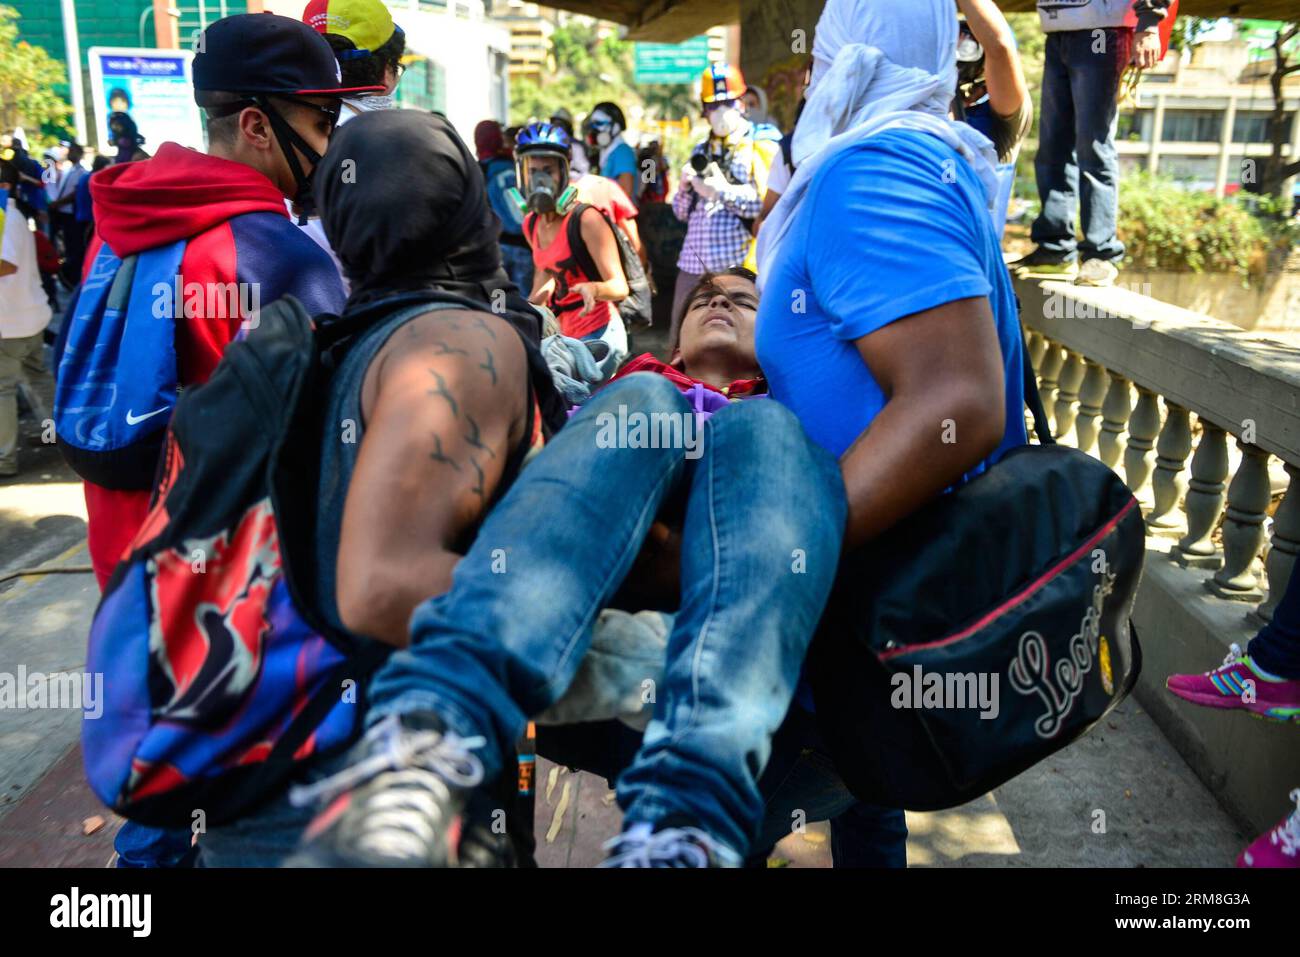 Demonstrators carry an injured person during an anti-government protest in Las Mercedes, Caracas, Venezuela, on April 12, 2014. (Xinhua/Carlos Becerra) (fnc) VENEZUELA-CARACAS-SOCIETY-PROTEST PUBLICATIONxNOTxINxCHN   demonstrator Carry to Injured Person during to Anti Government Protest in Las Mercedes Caracas Venezuela ON April 12 2014 XINHUA Carlos Becerra FNC Venezuela Caracas Society Protest PUBLICATIONxNOTxINxCHN Stock Photo